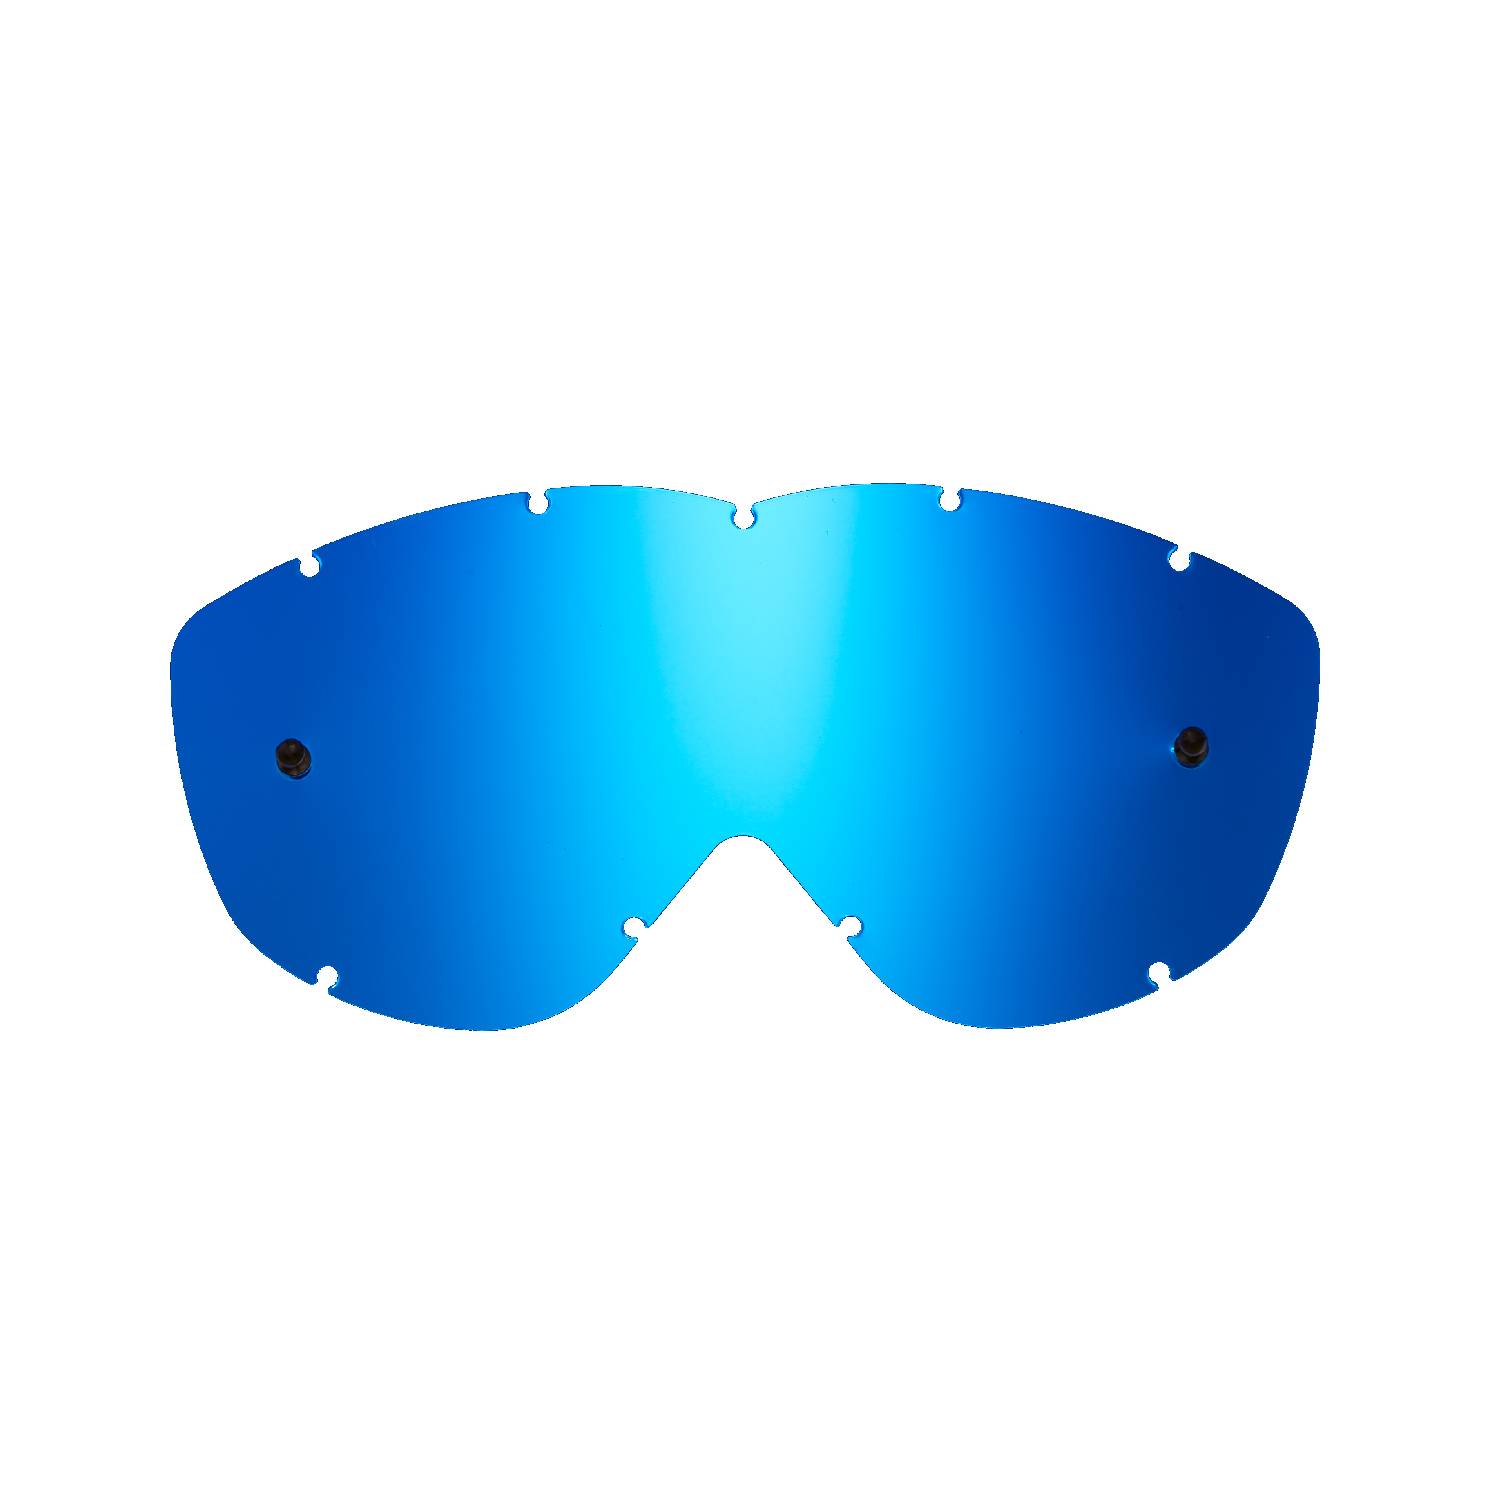 blue-toned mirrored replacement lenses for goggles compatible for Spy Alloy / Targa goggle